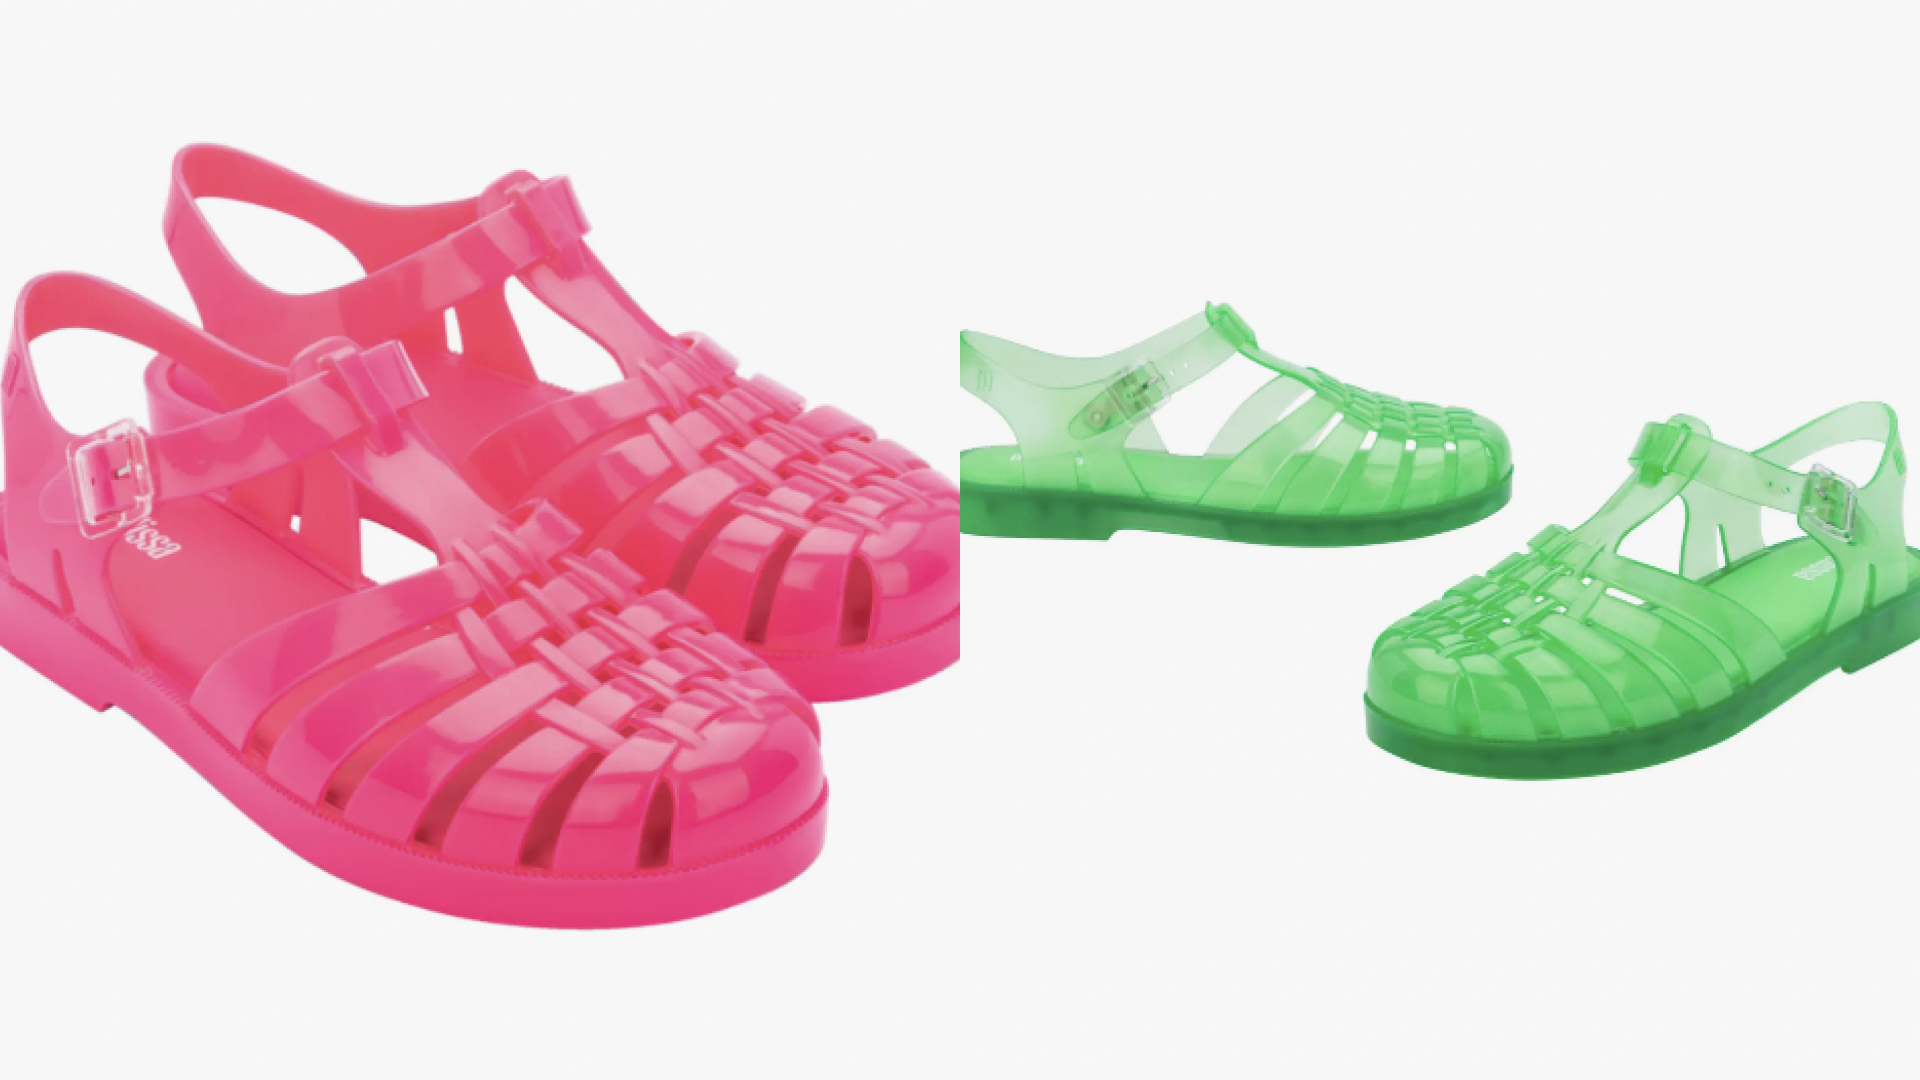 Nordstrom jelly sandals 